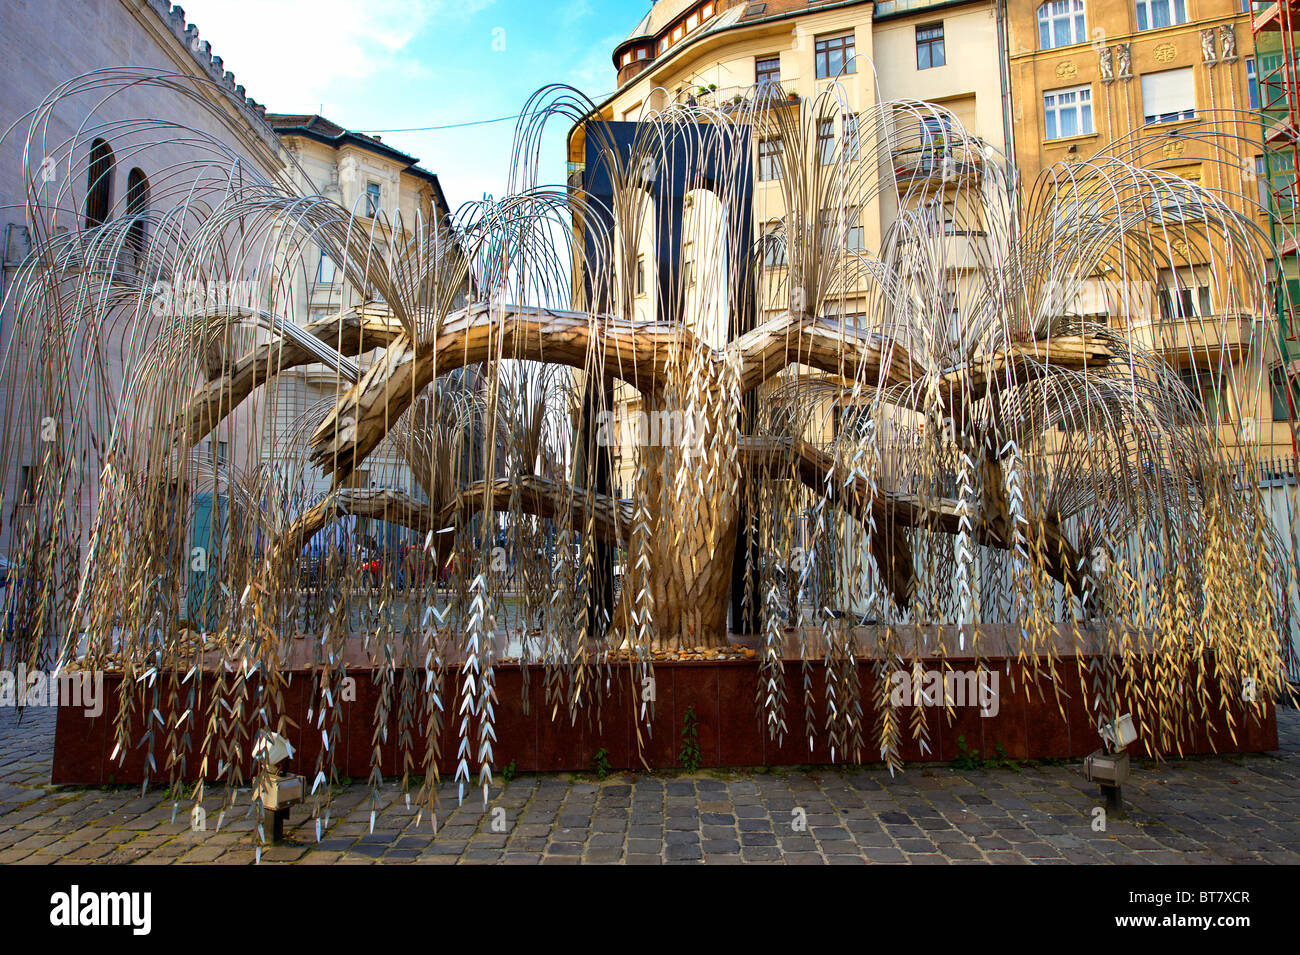 Imre Varga's 'Memorial of the Hungarian Jewish Martyrs' with leaves with the names of Jews murdered in the second world War. Stock Photo